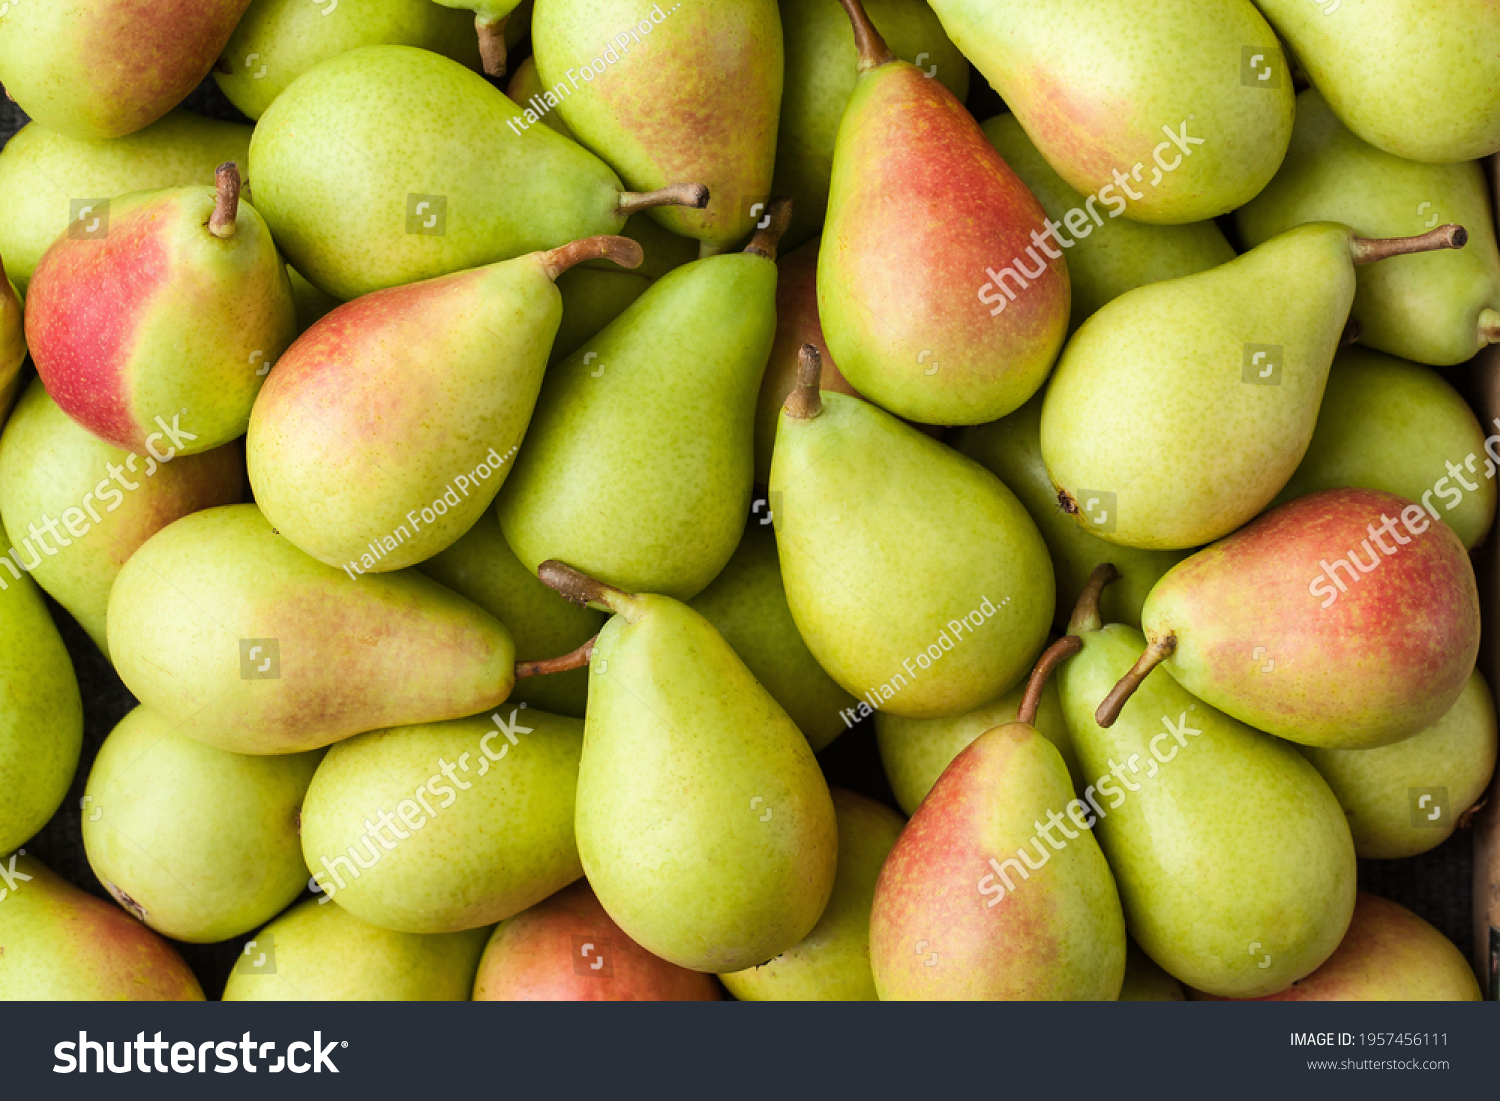 Pears, Large Group, Background – Italian Cultivar of Green Pear "Pera Coscia" (Pyrus Communis) with Red Shade – Detailed Close-Up Macro, Top View, from Above #1957456111